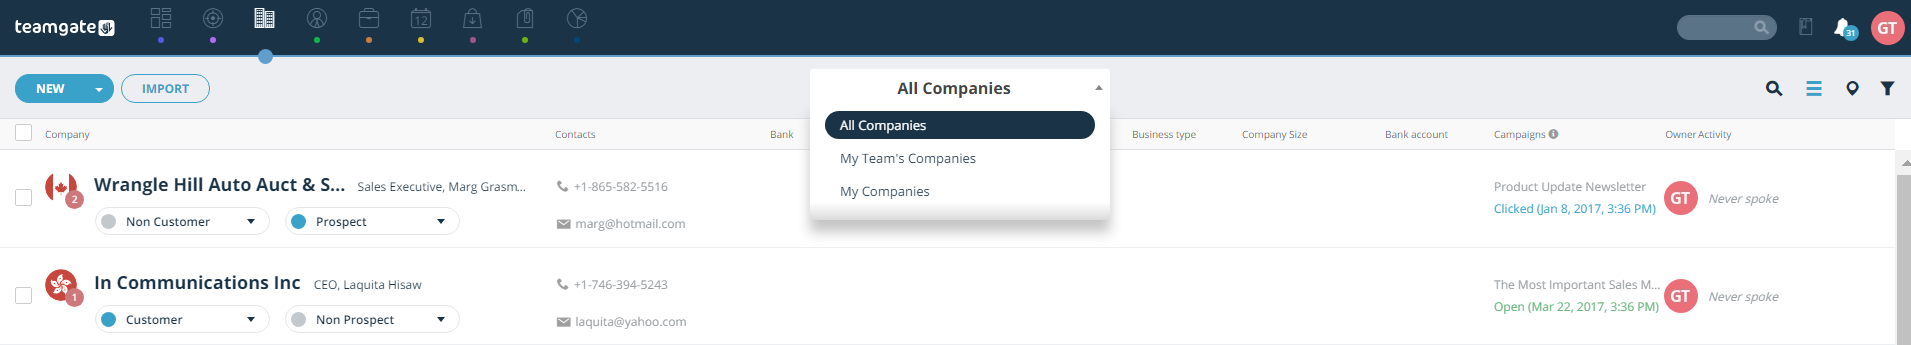 all-companies-my-companies-teams-companies-teamgate.png